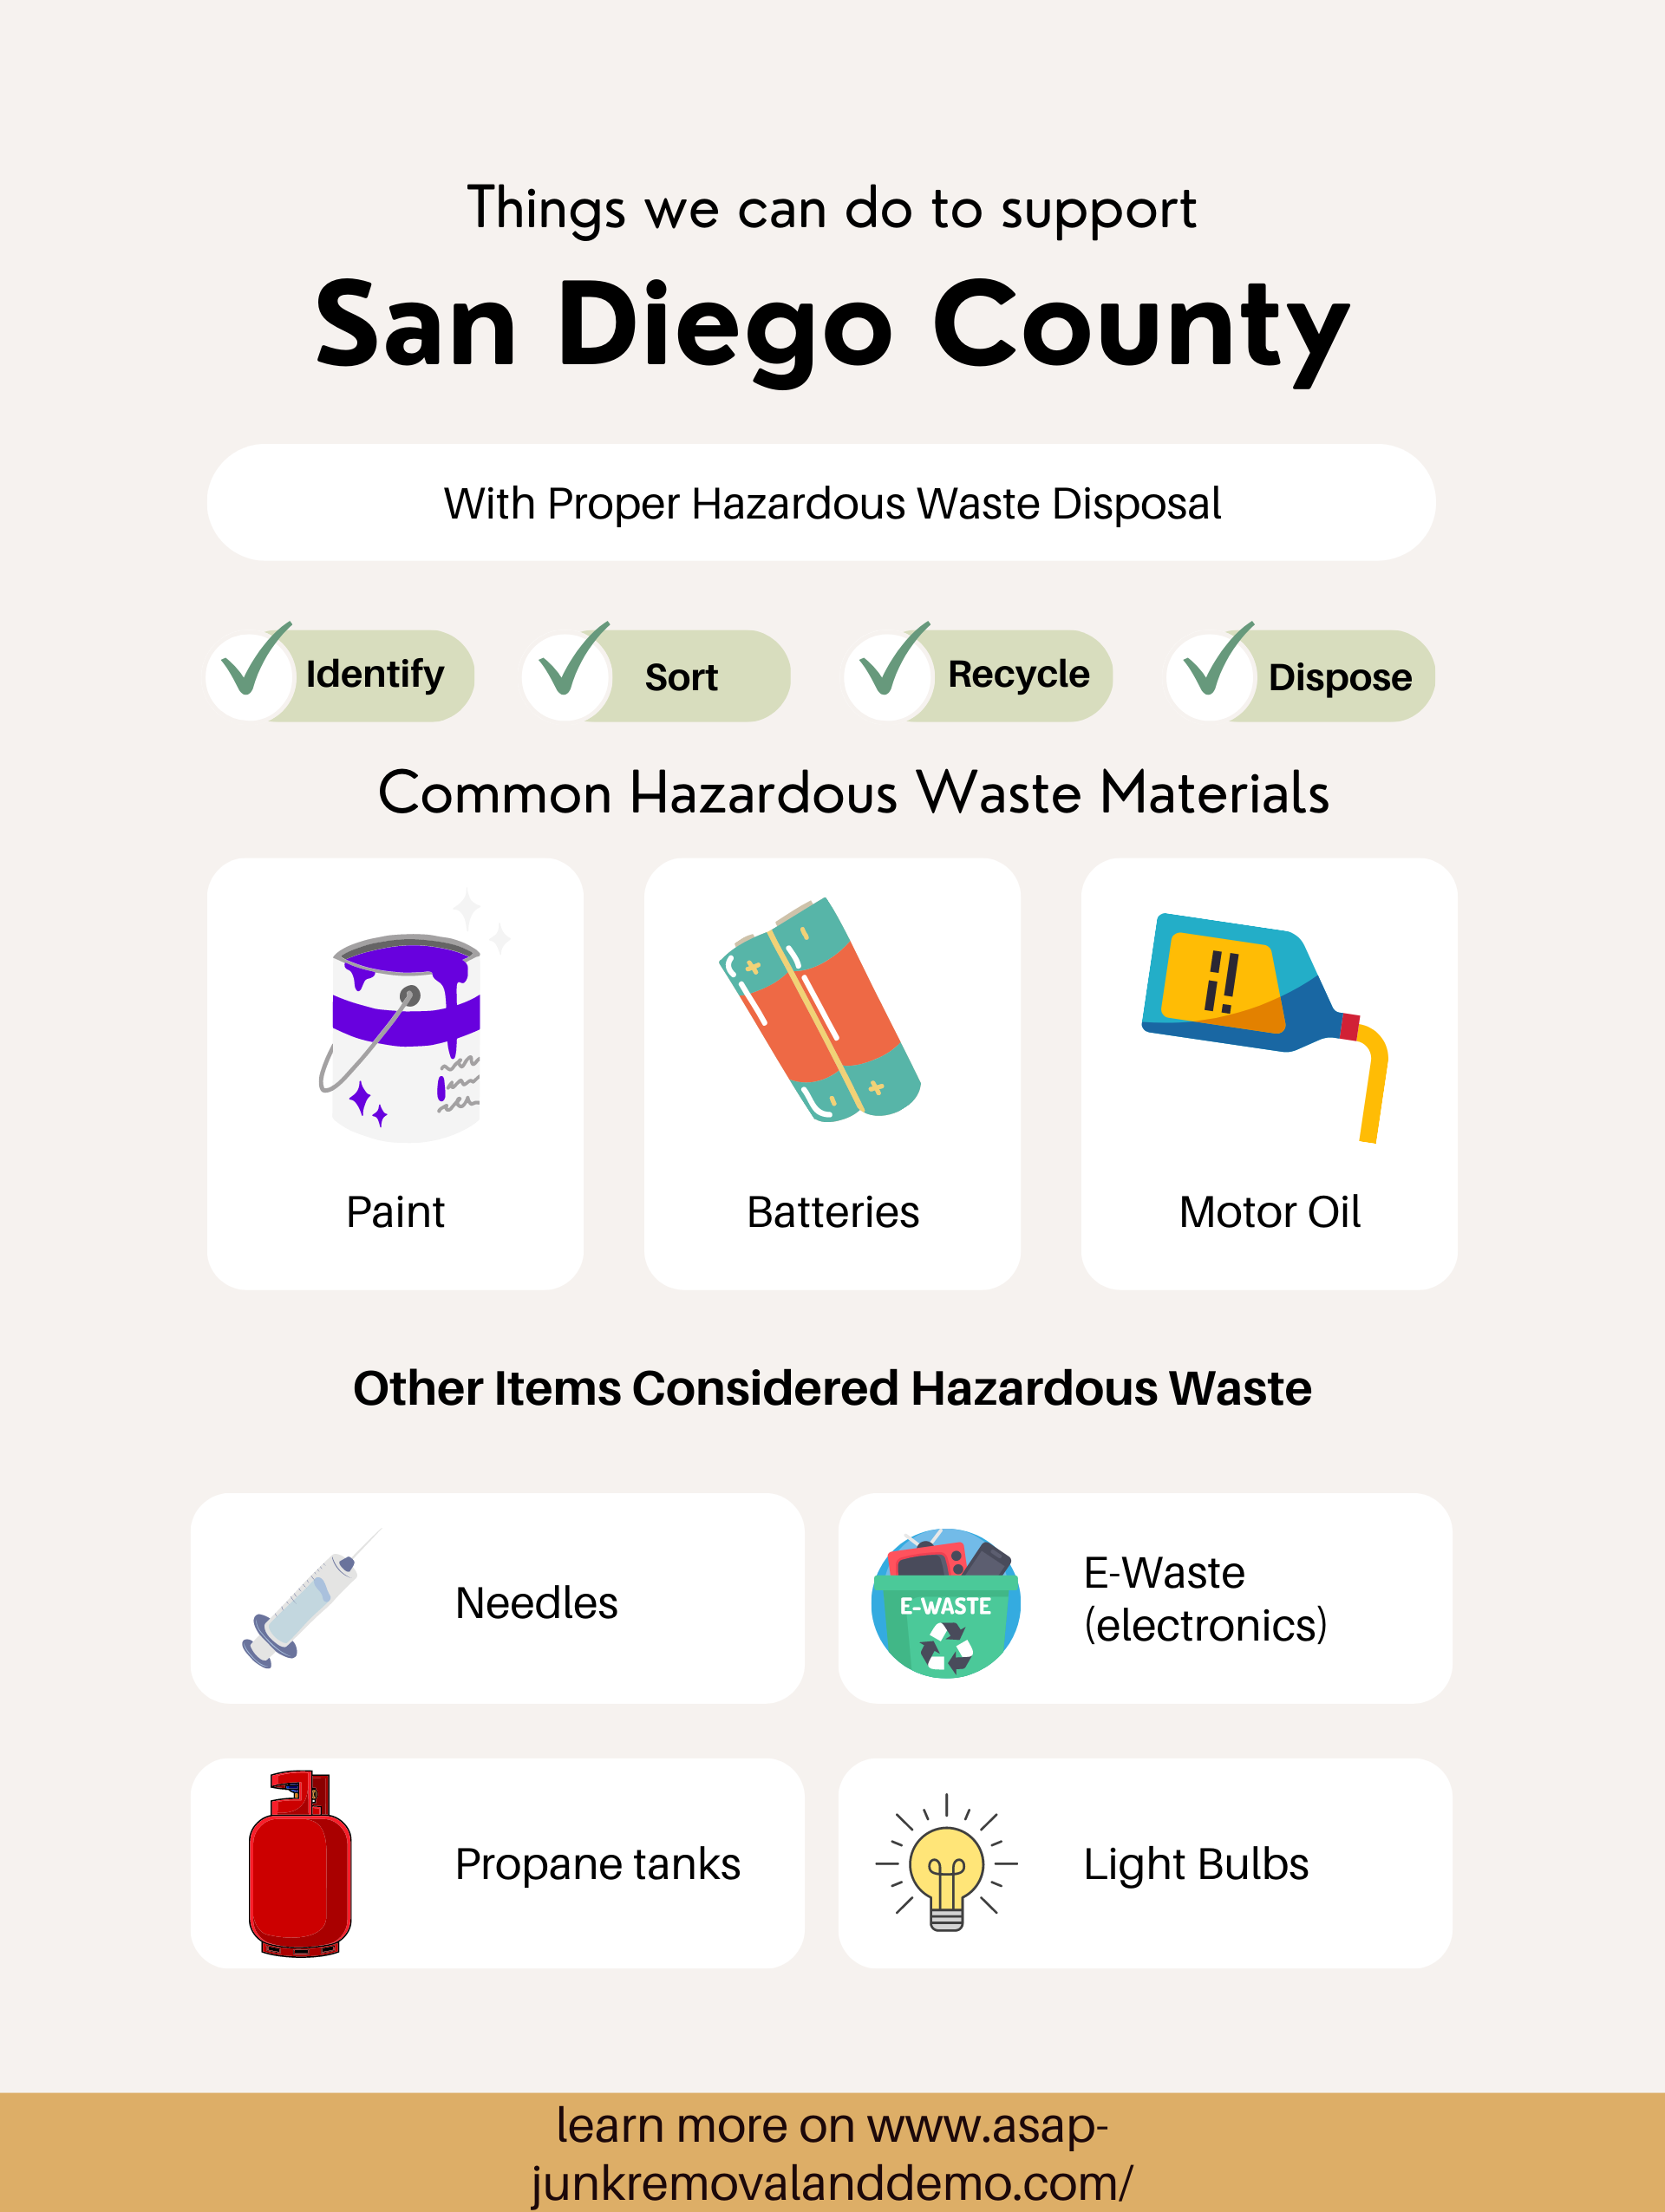 Items considered hazardous waste in san diego county infographic